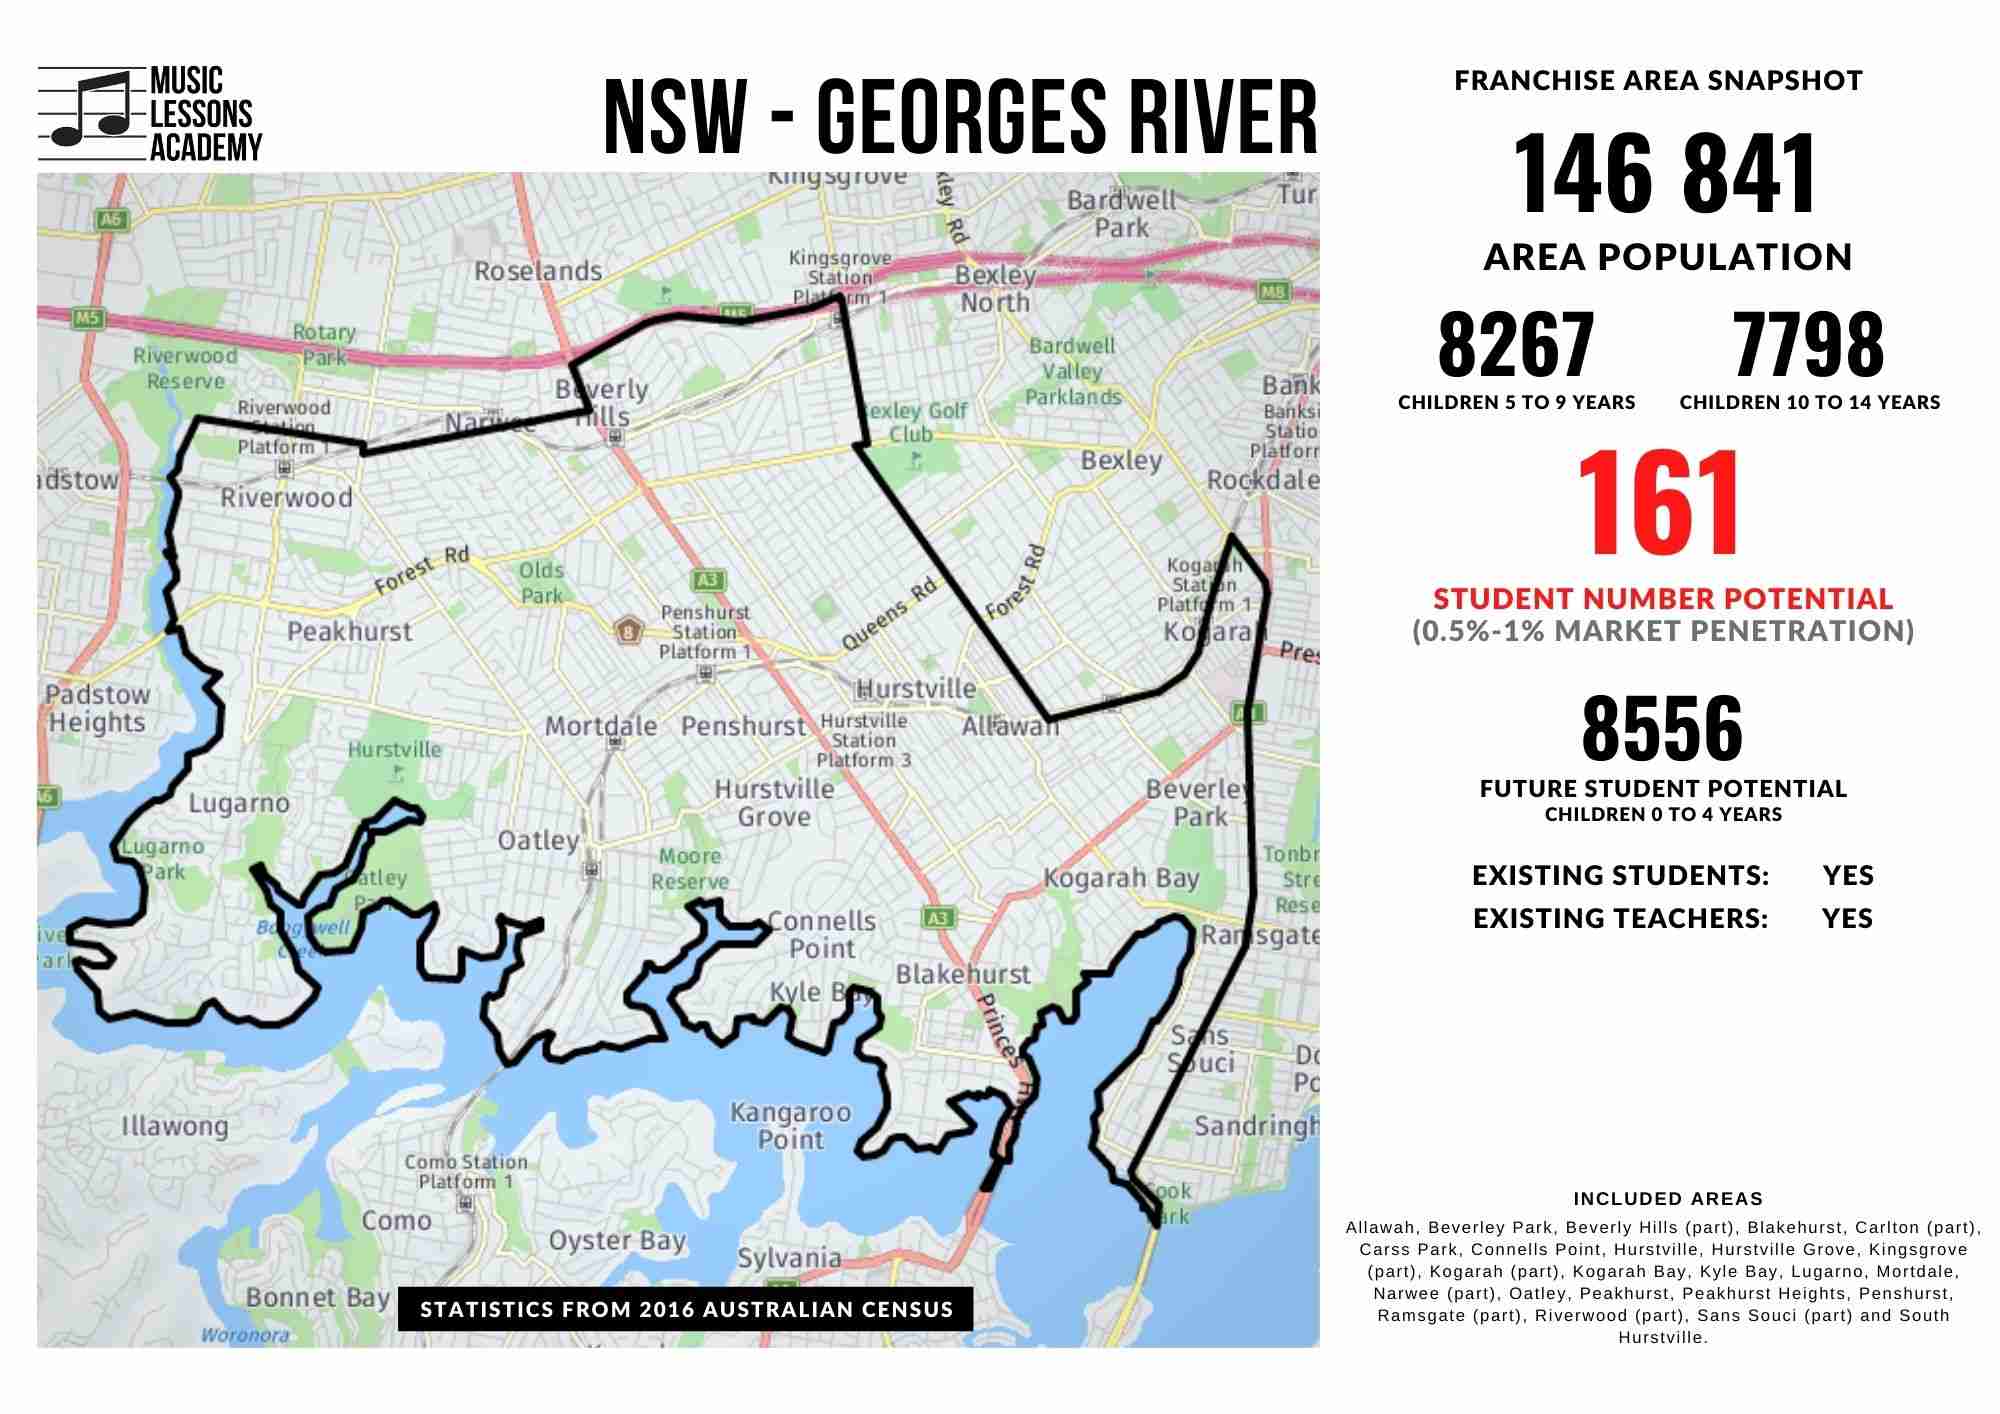 NSW Georges River Franchise for sale